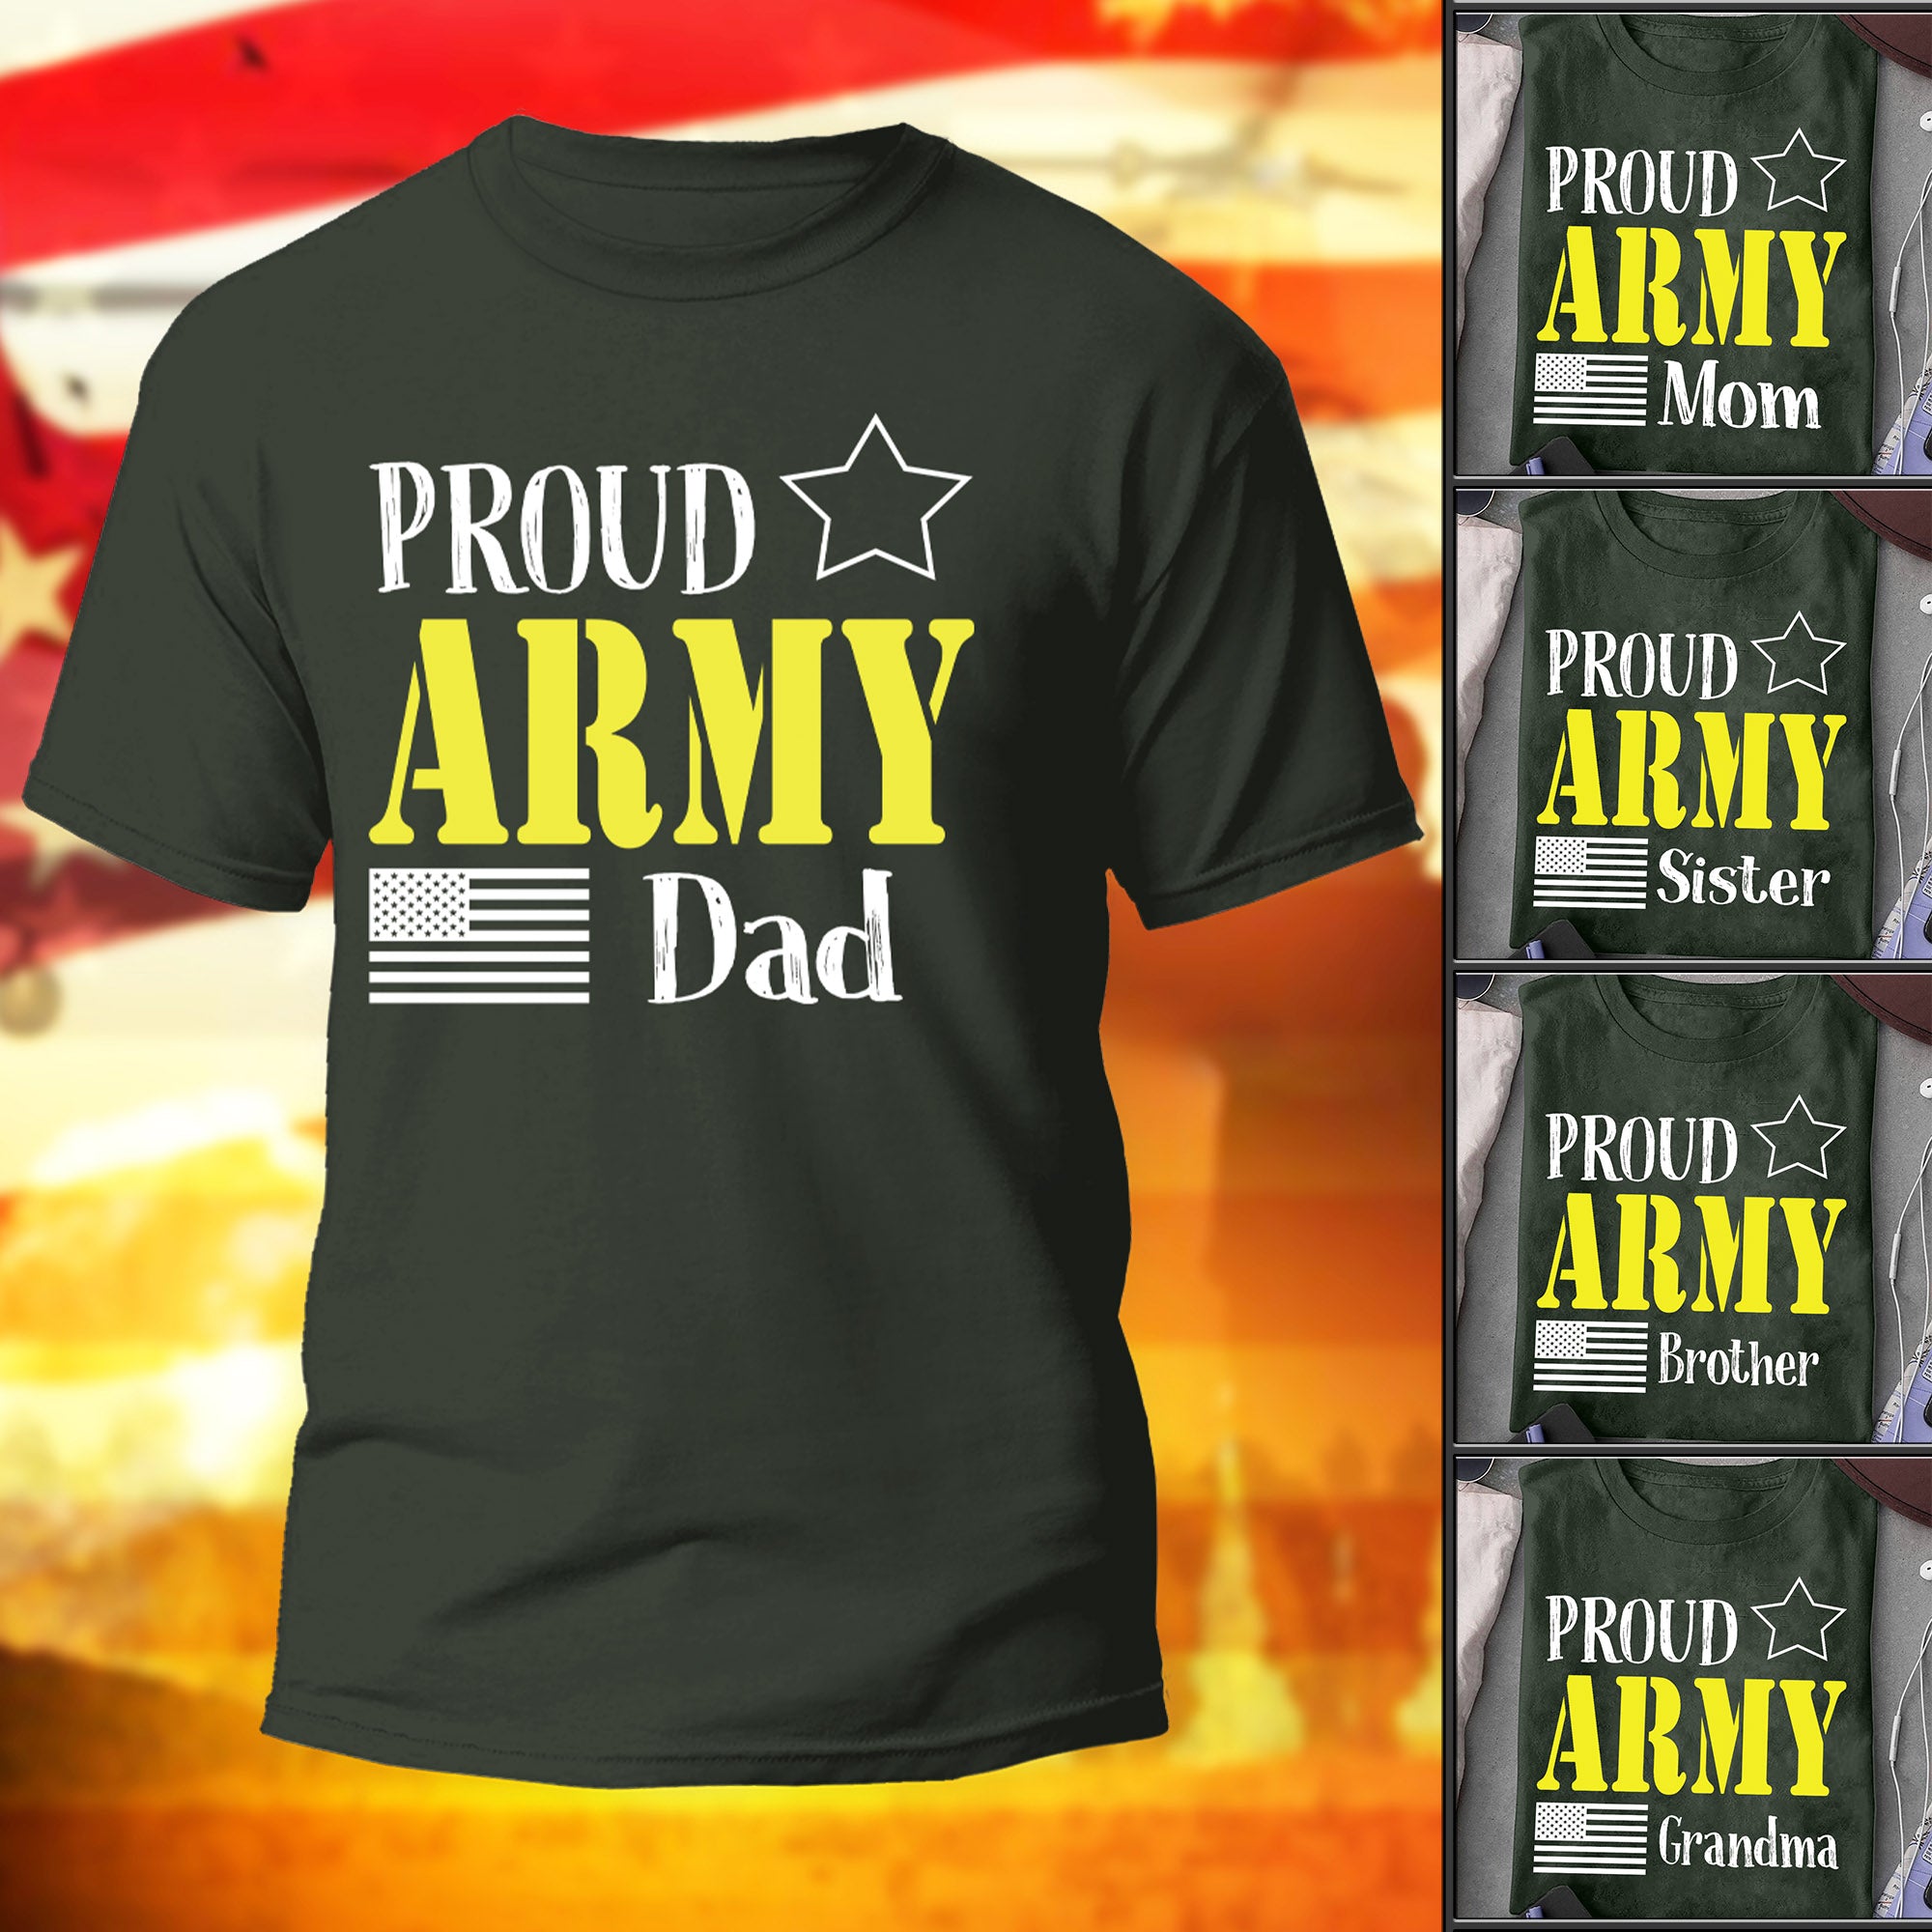 Proud US Army T-Shirt U.S Army Family Matching Shirt Personalized Military Gift